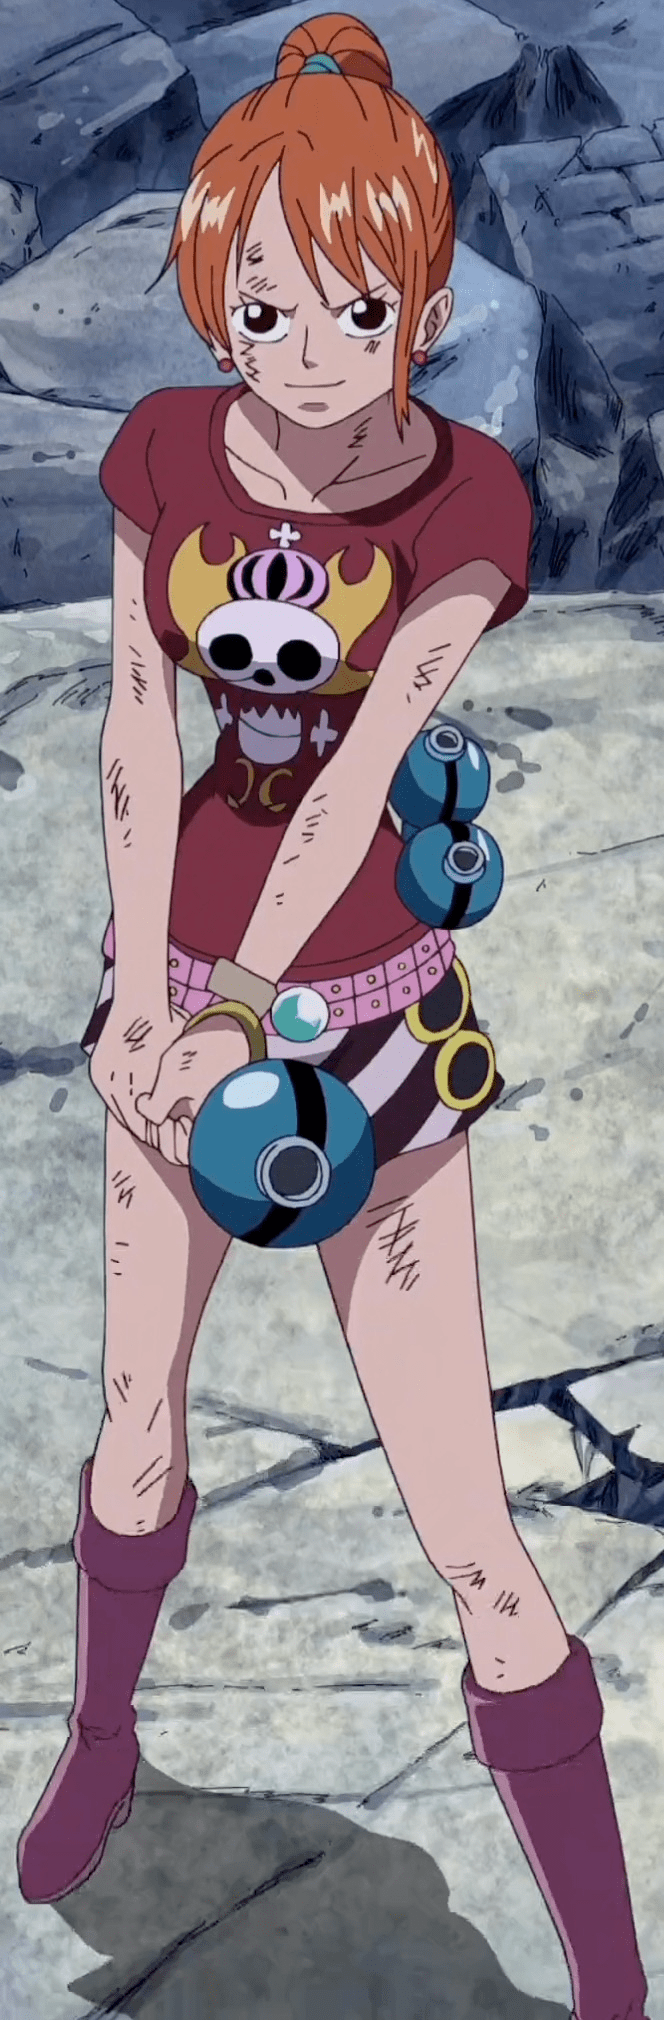 Nami_4th_Thriller_Bark_Outfit.png